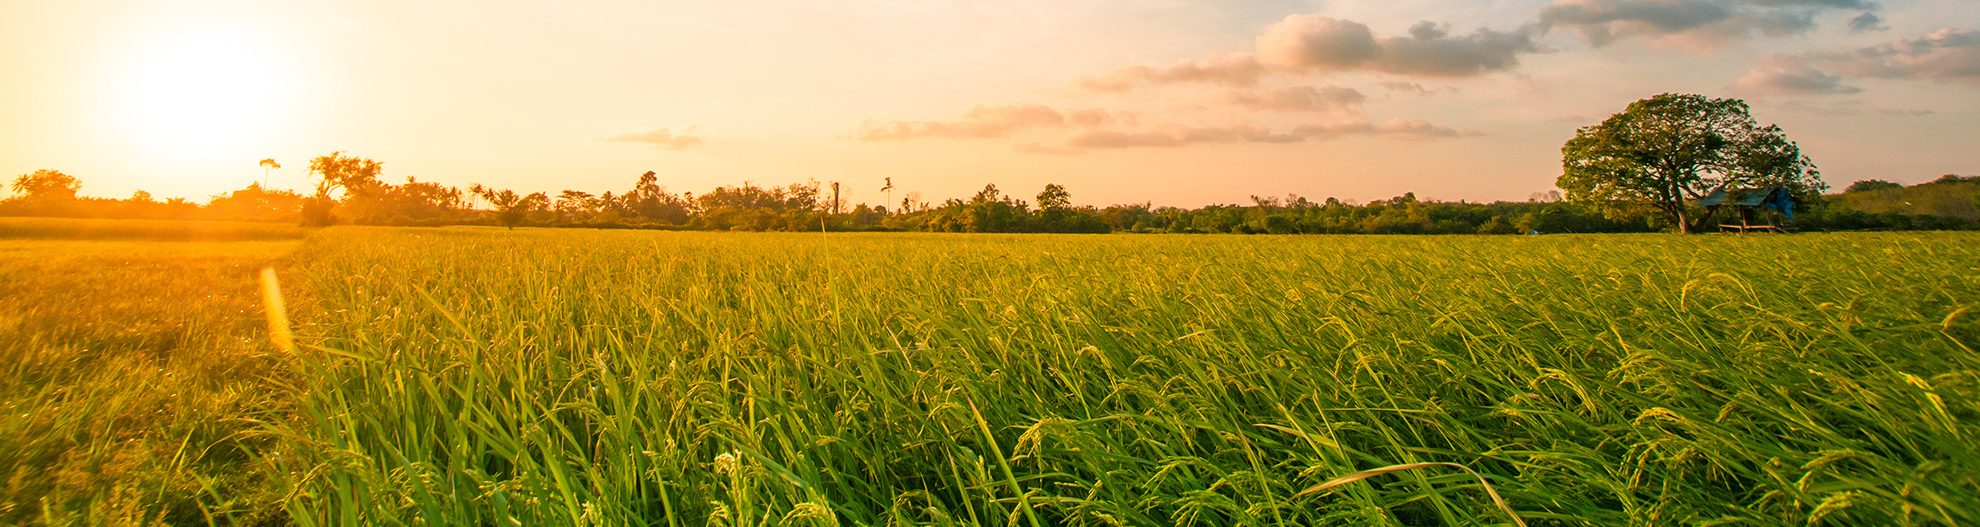 Green rice field with evening sky